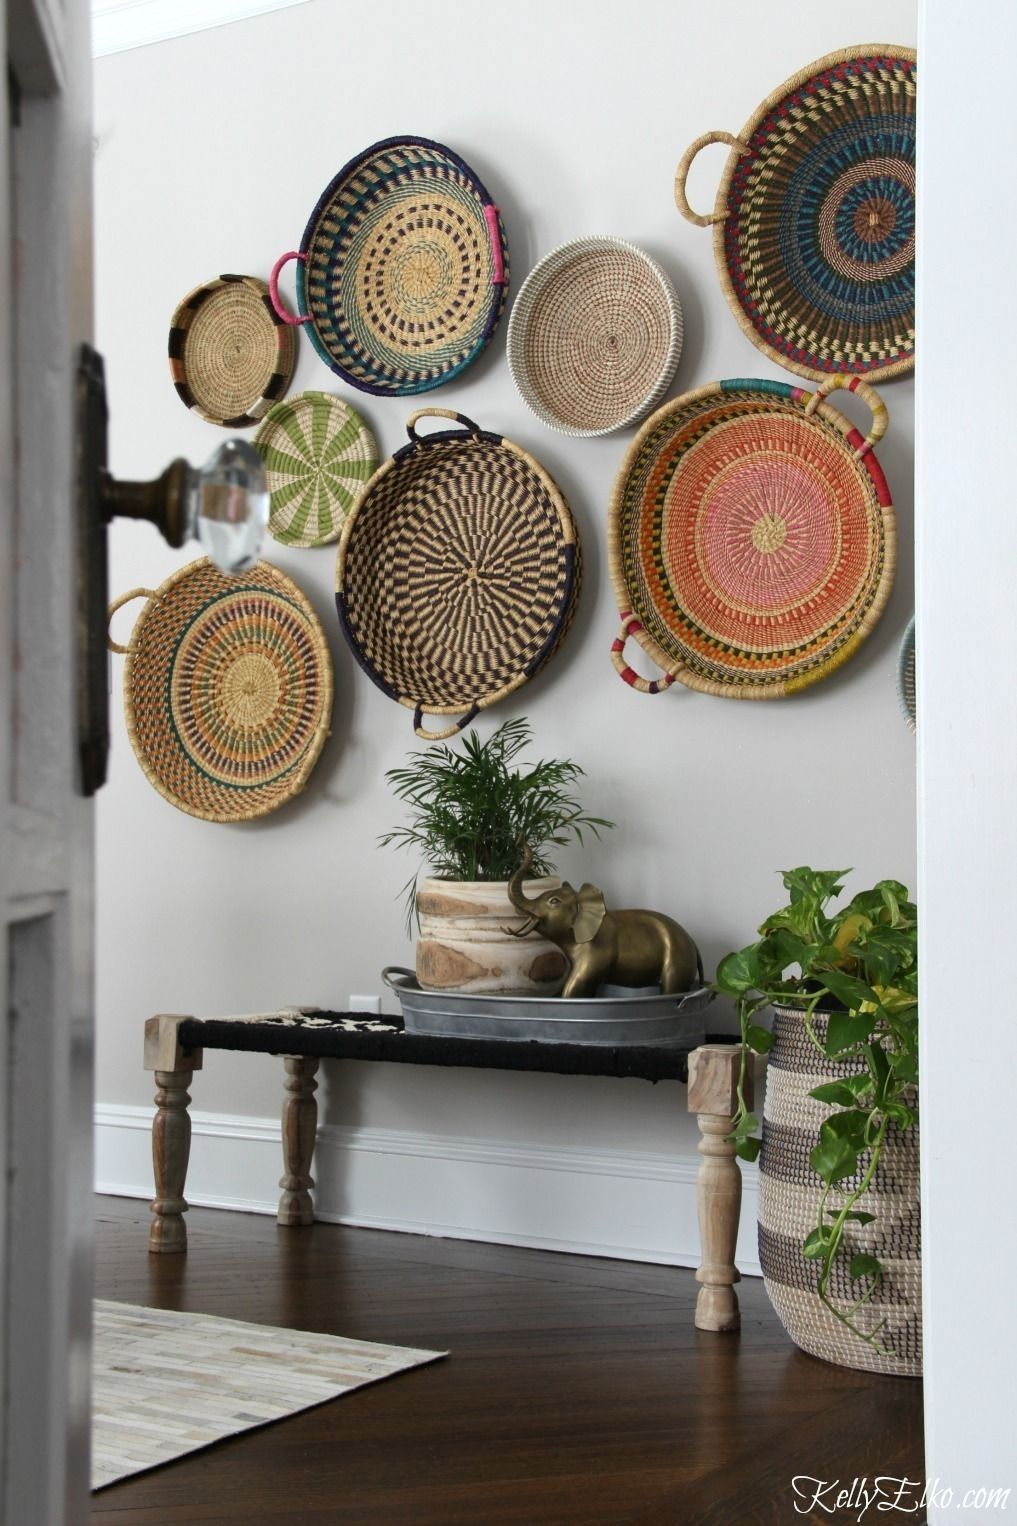 Colorful Basket Gallery Wall | Wall Art Decor | Pinterest | Gallery With Woven Basket Wall Art (View 2 of 20)